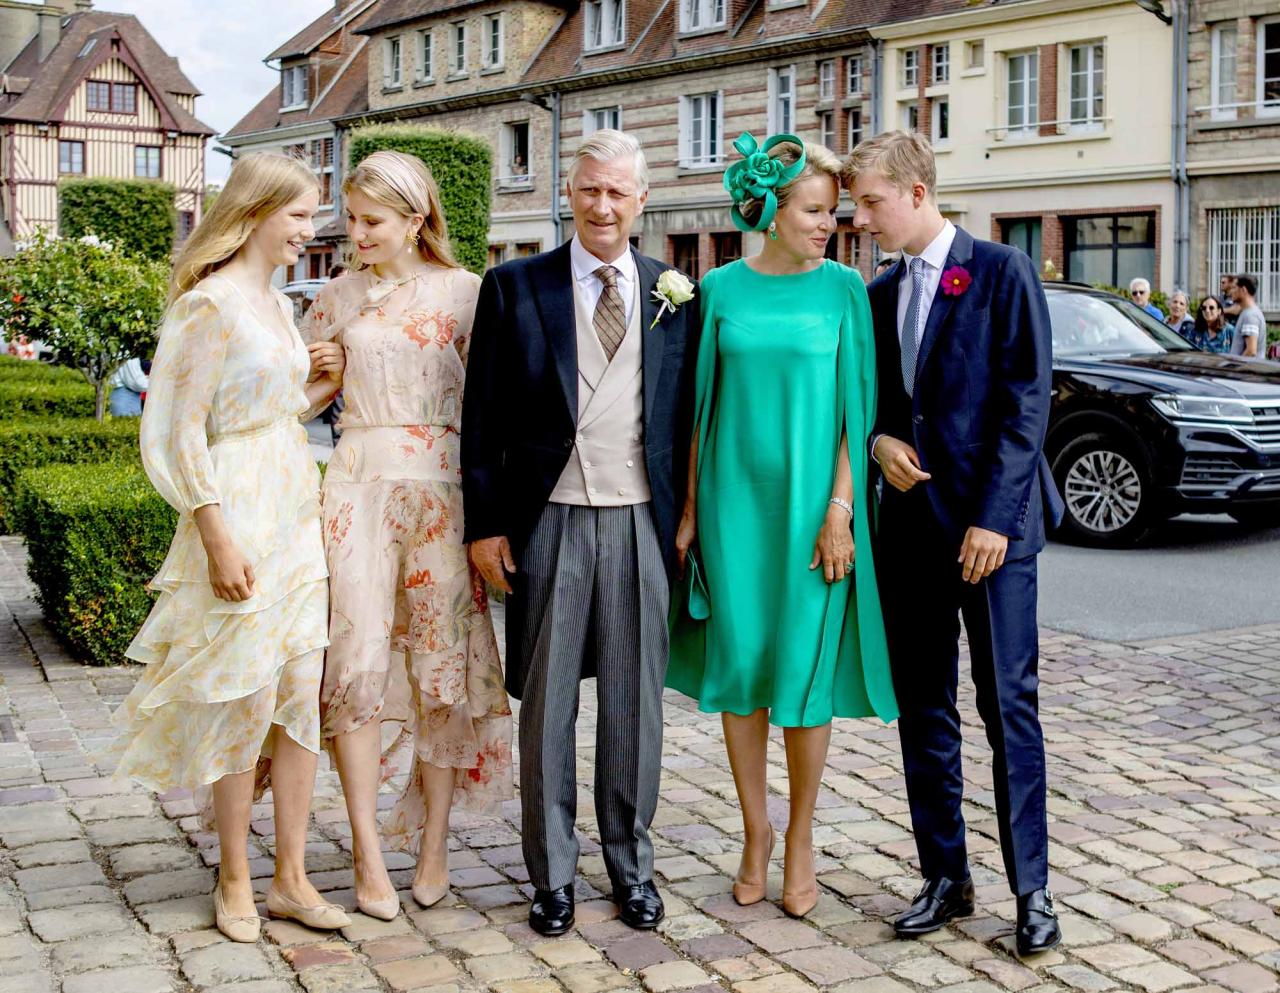 03-08-2022 Marriage Wedding of Count Charles-Henri d Udekem d Acoz, the younger brother of the Belgium Queen, and Caroline Philippe at Pont-L Eveque in France.
Queen Mathilde and King Filip, Philippe
Princess Elisabeth and Prince Emmanuel and Princess Eleonore

© ddp images/PPE/Nieboer Point de Vue out